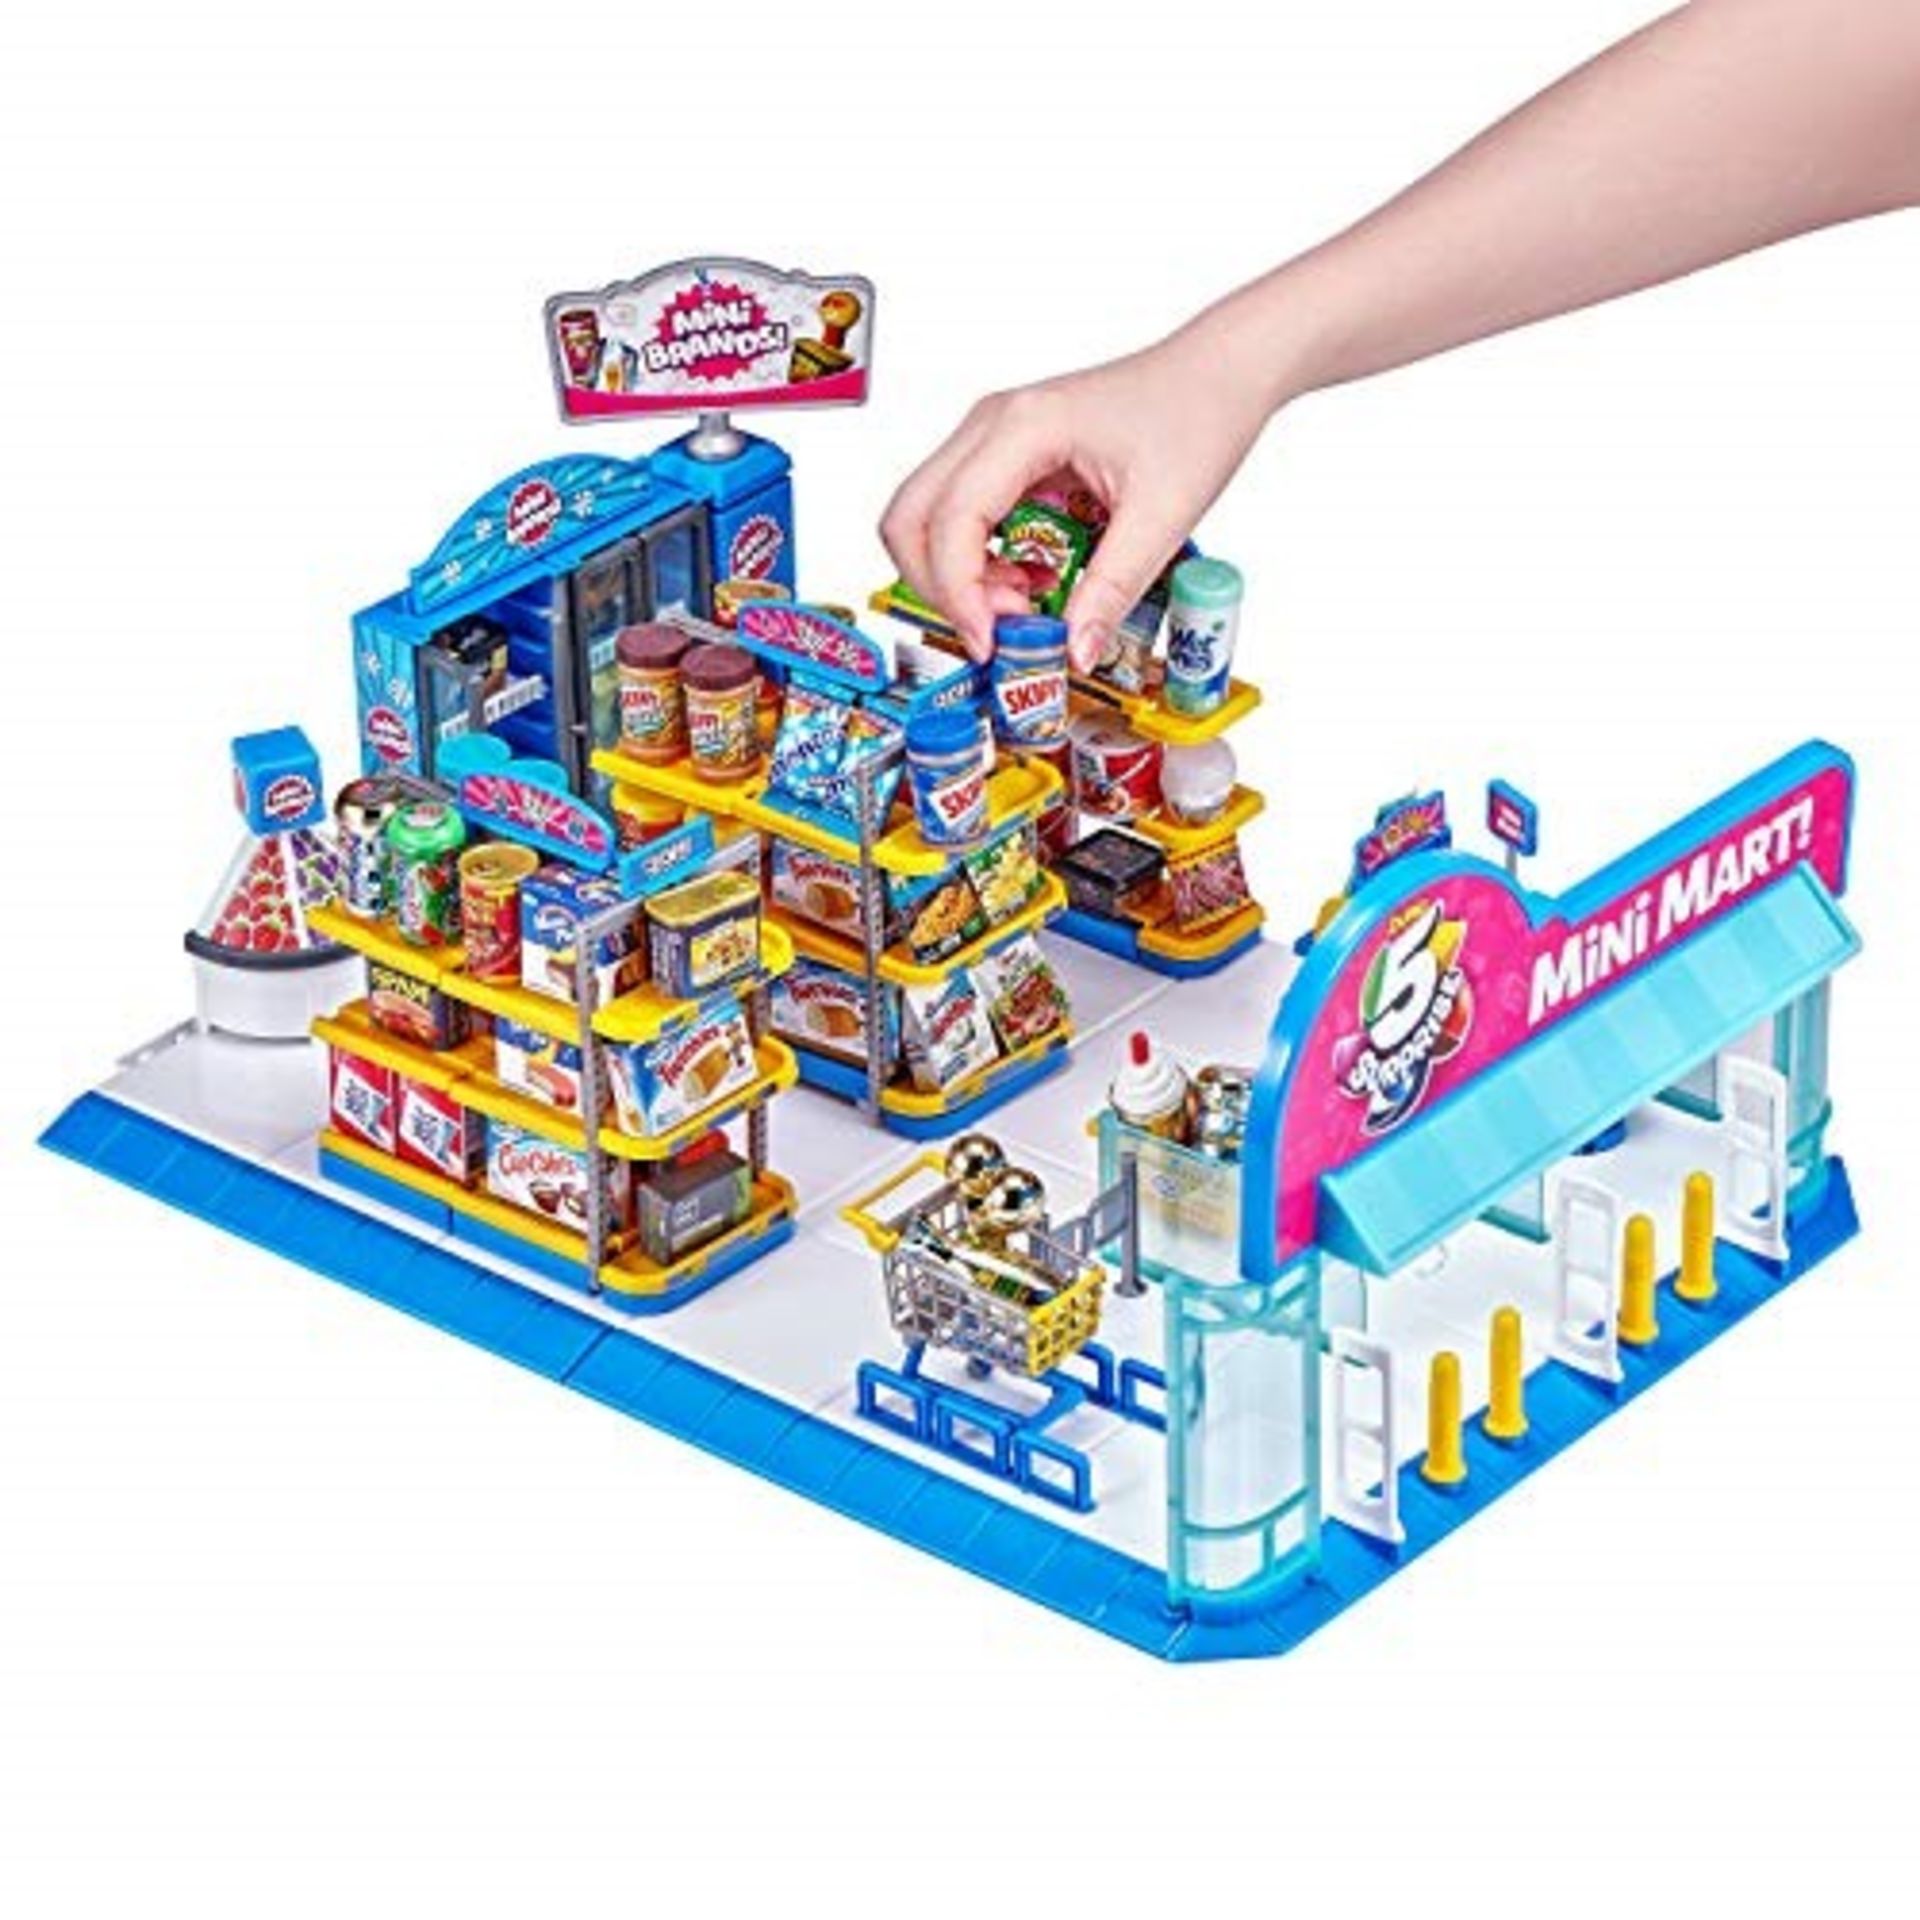 ZURU 5 SURPRISE 7798 Electronic Mart with 4 Mystery Playset-Brown Box Packaging-Mini B